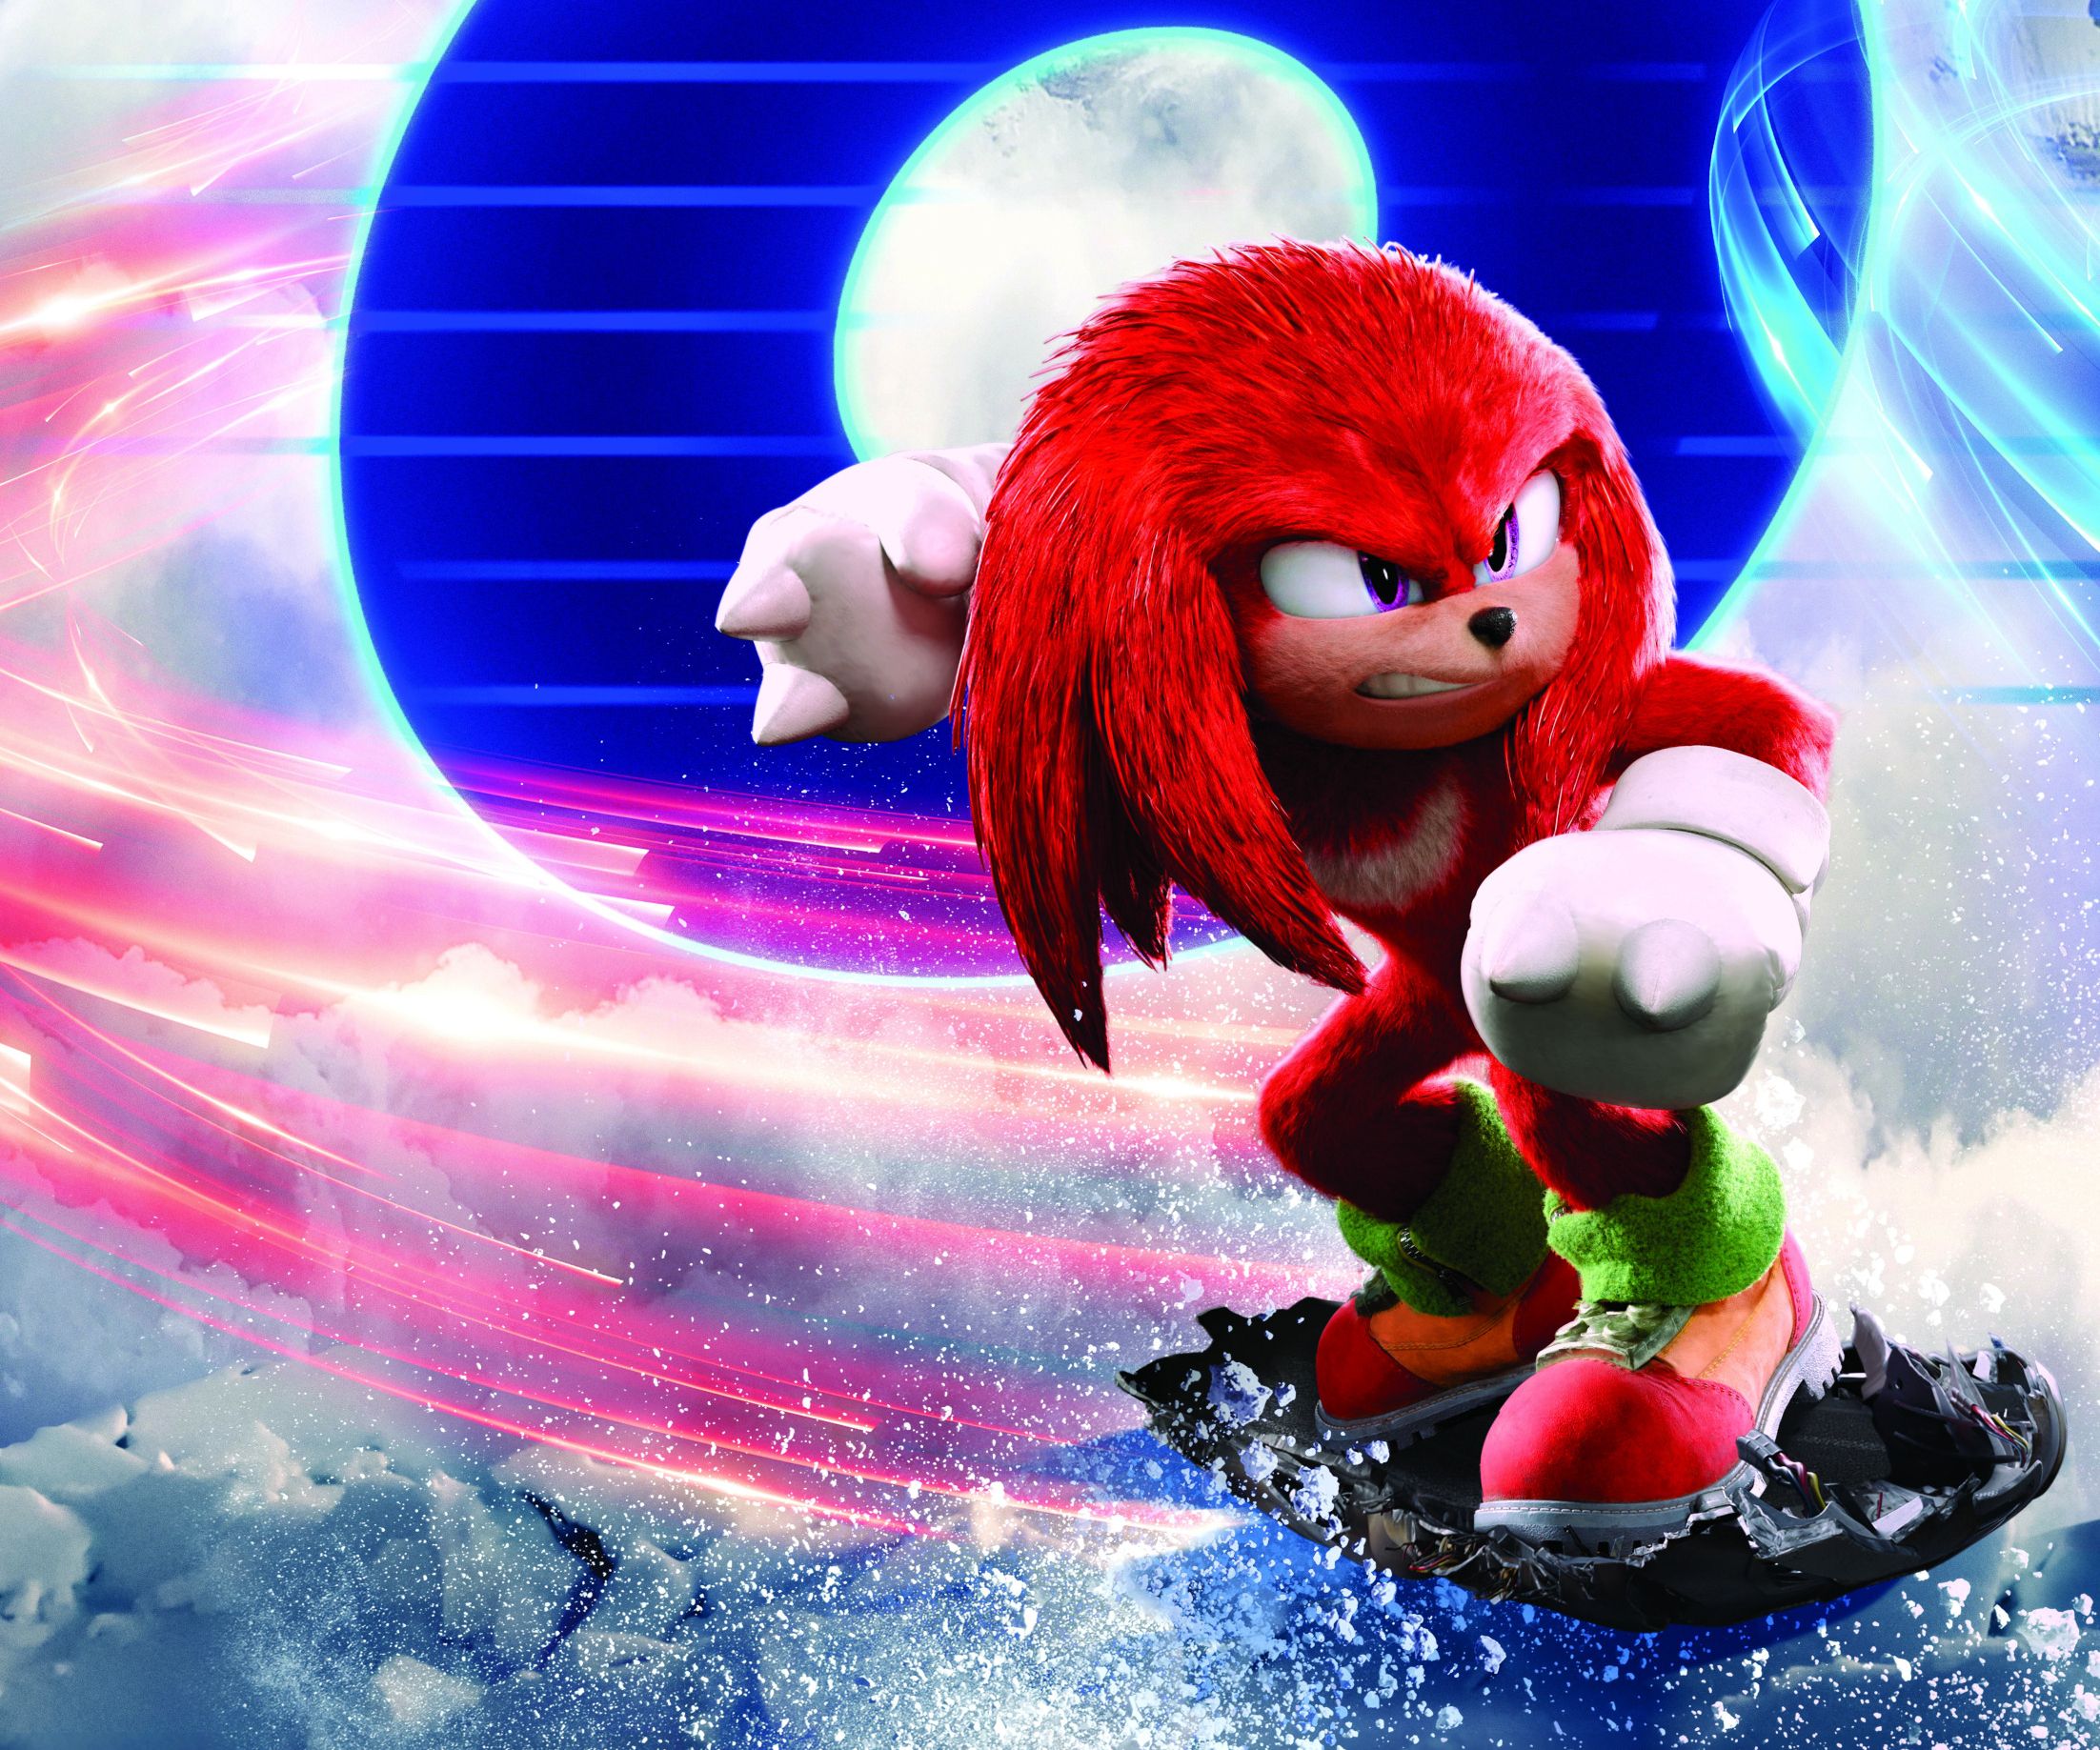 Knuckles the Echidna, a red echidna, stands on a snowboard in the air in front of a blue and pink portal - Sonic